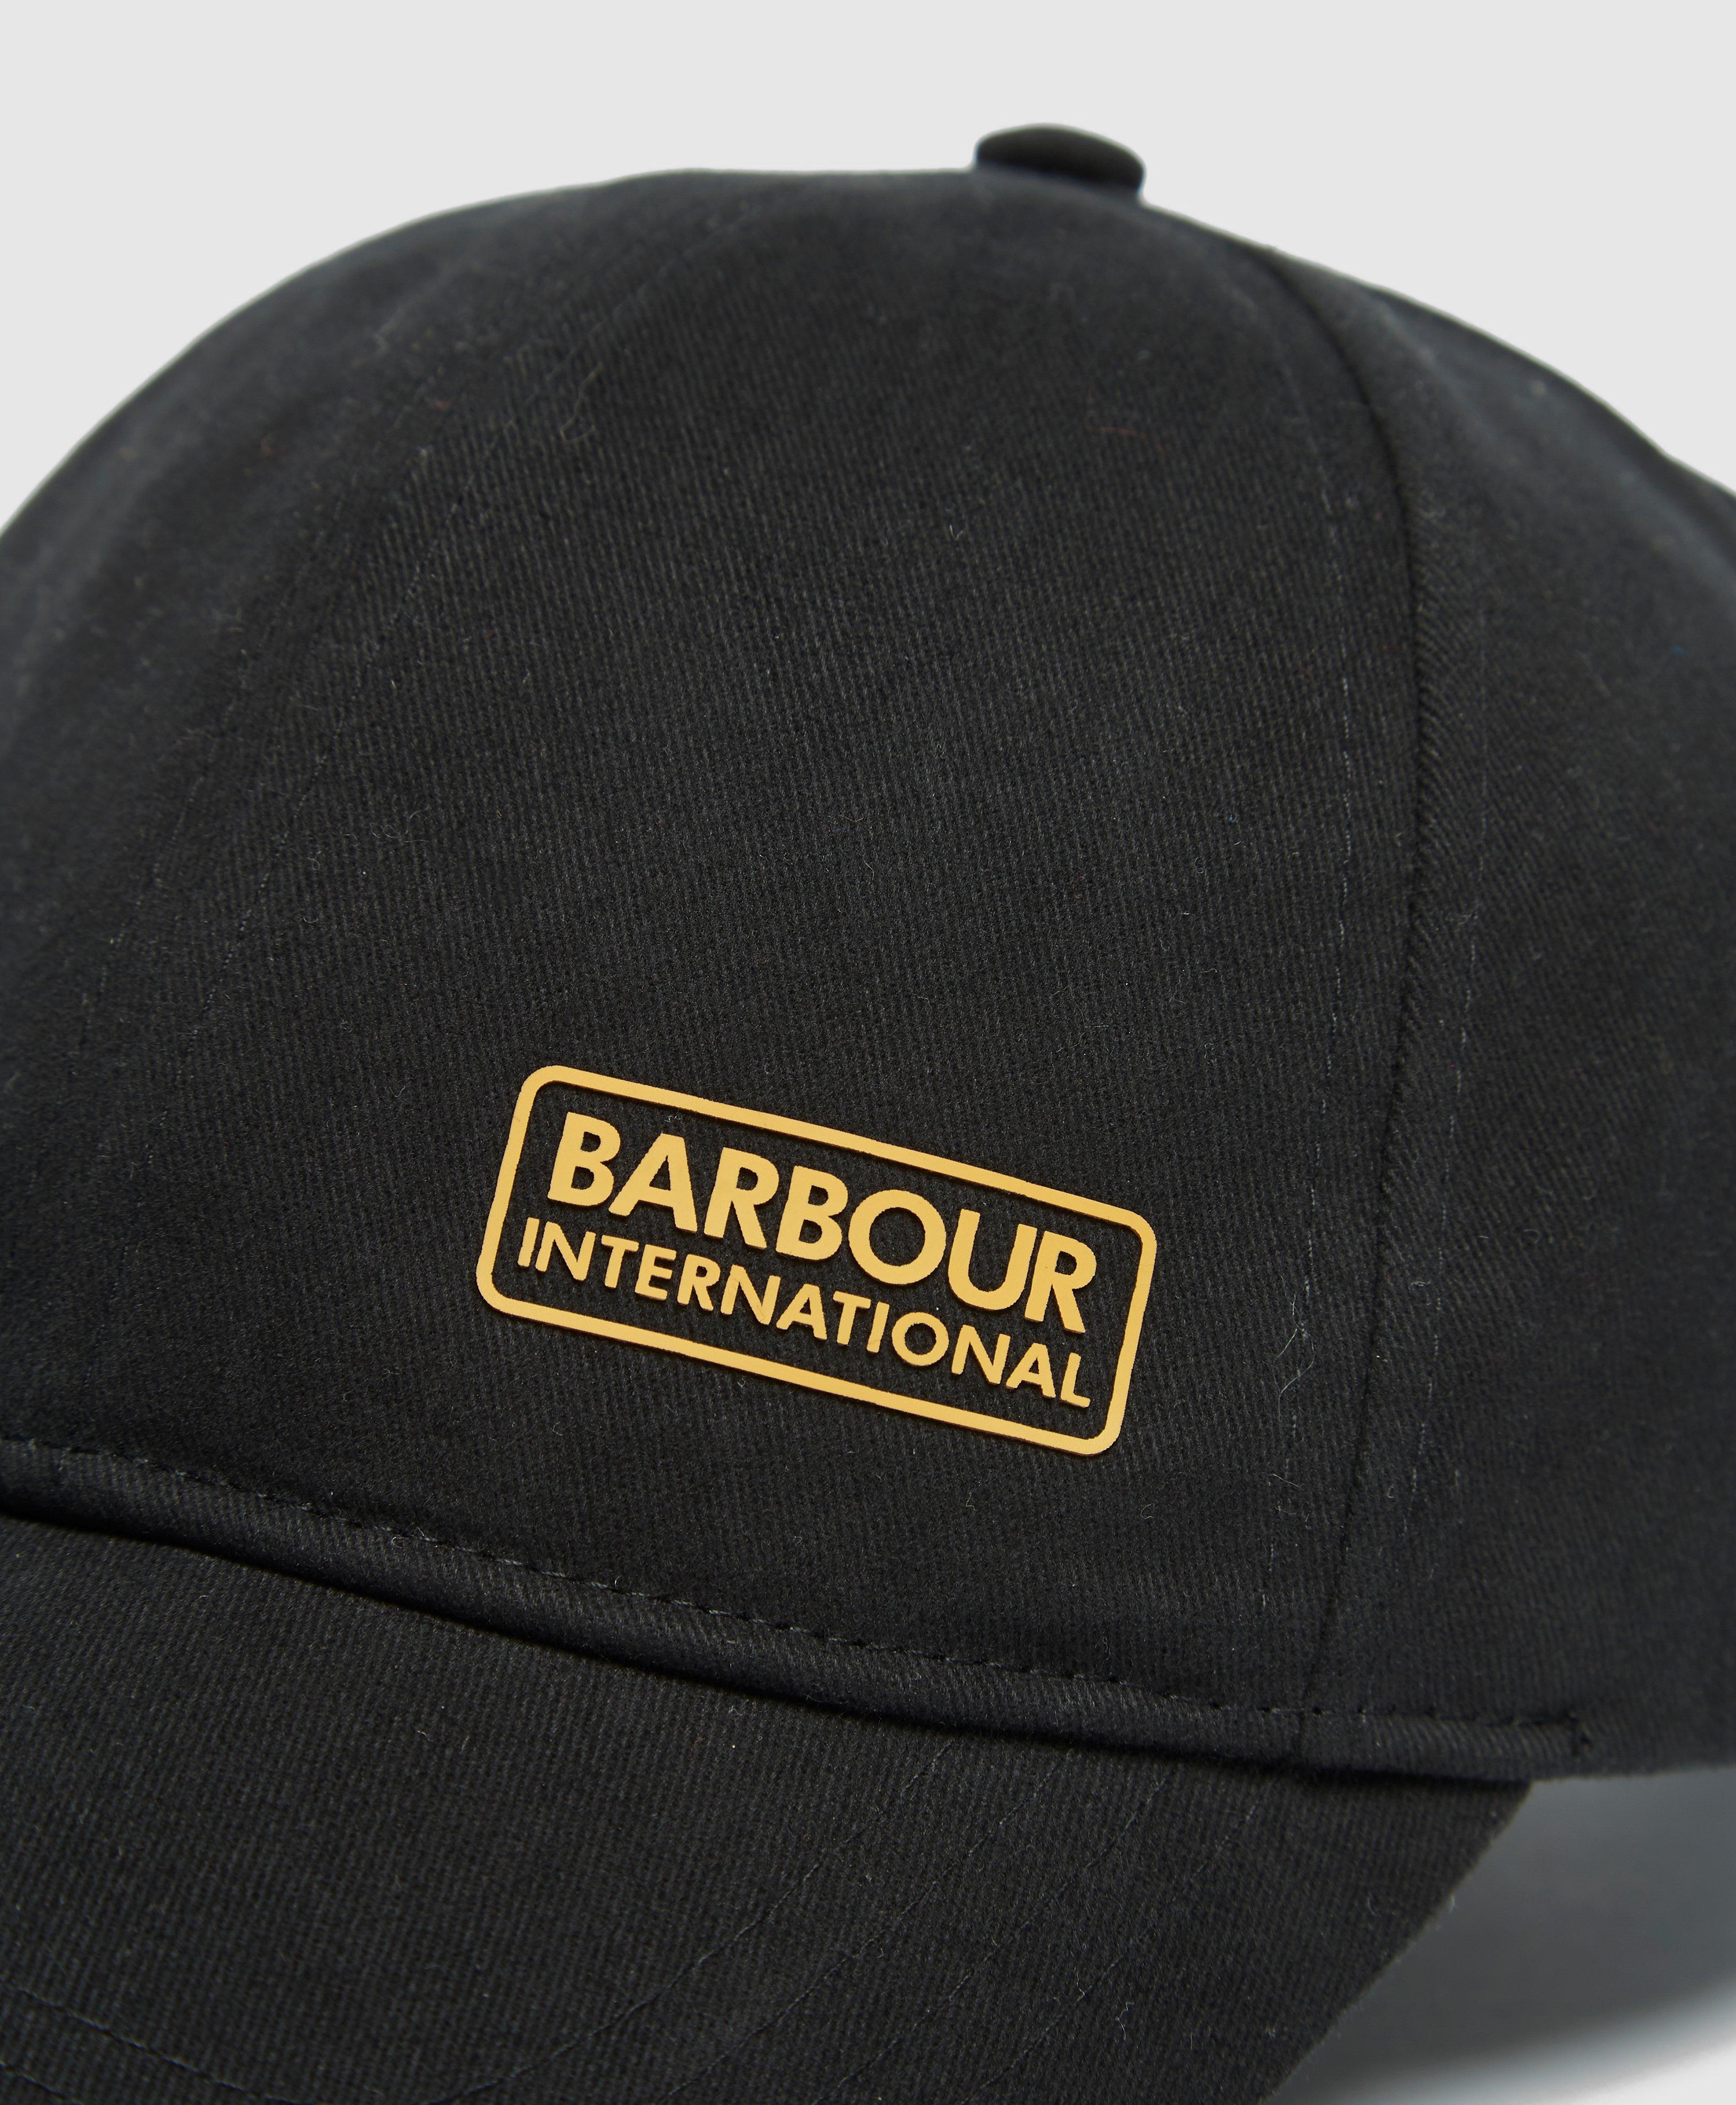 barbour international hat size guide